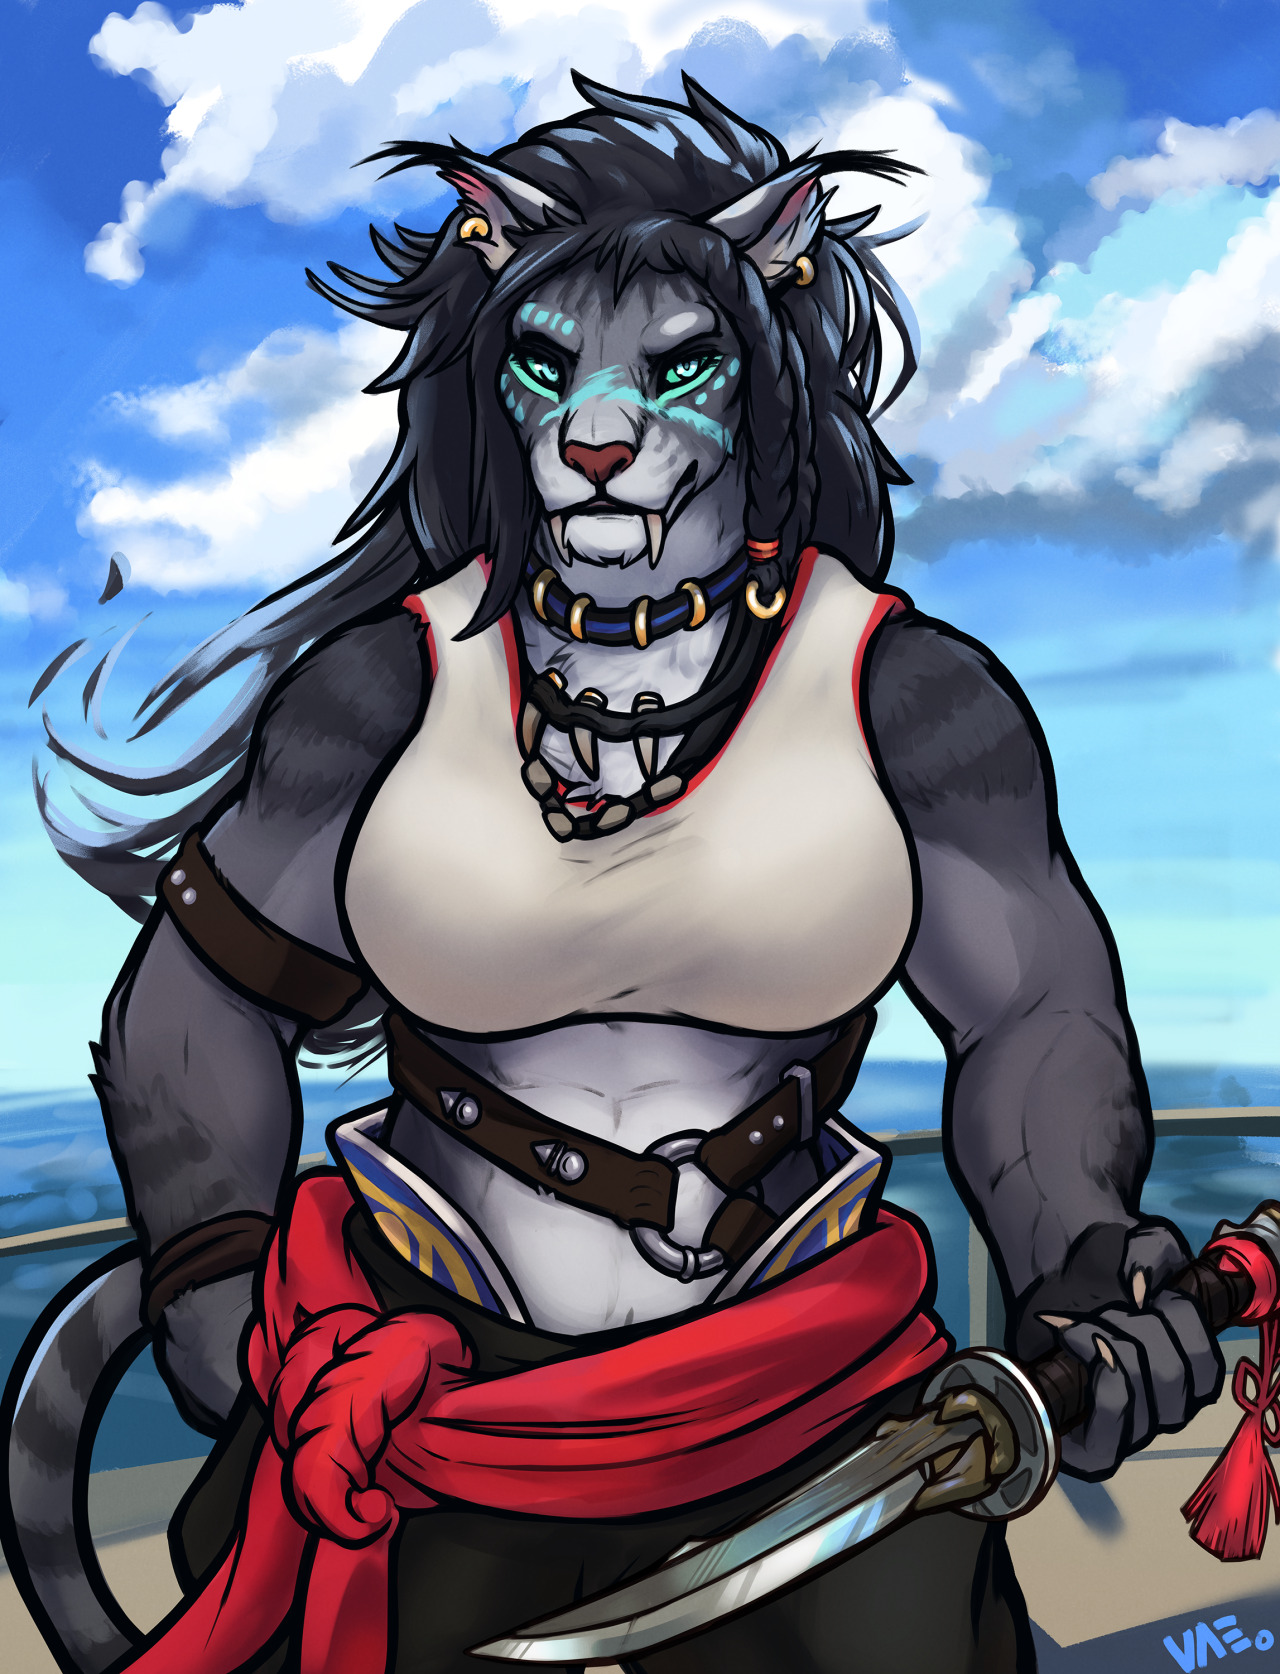  Female Hrothgar  as a playable race Show your support 